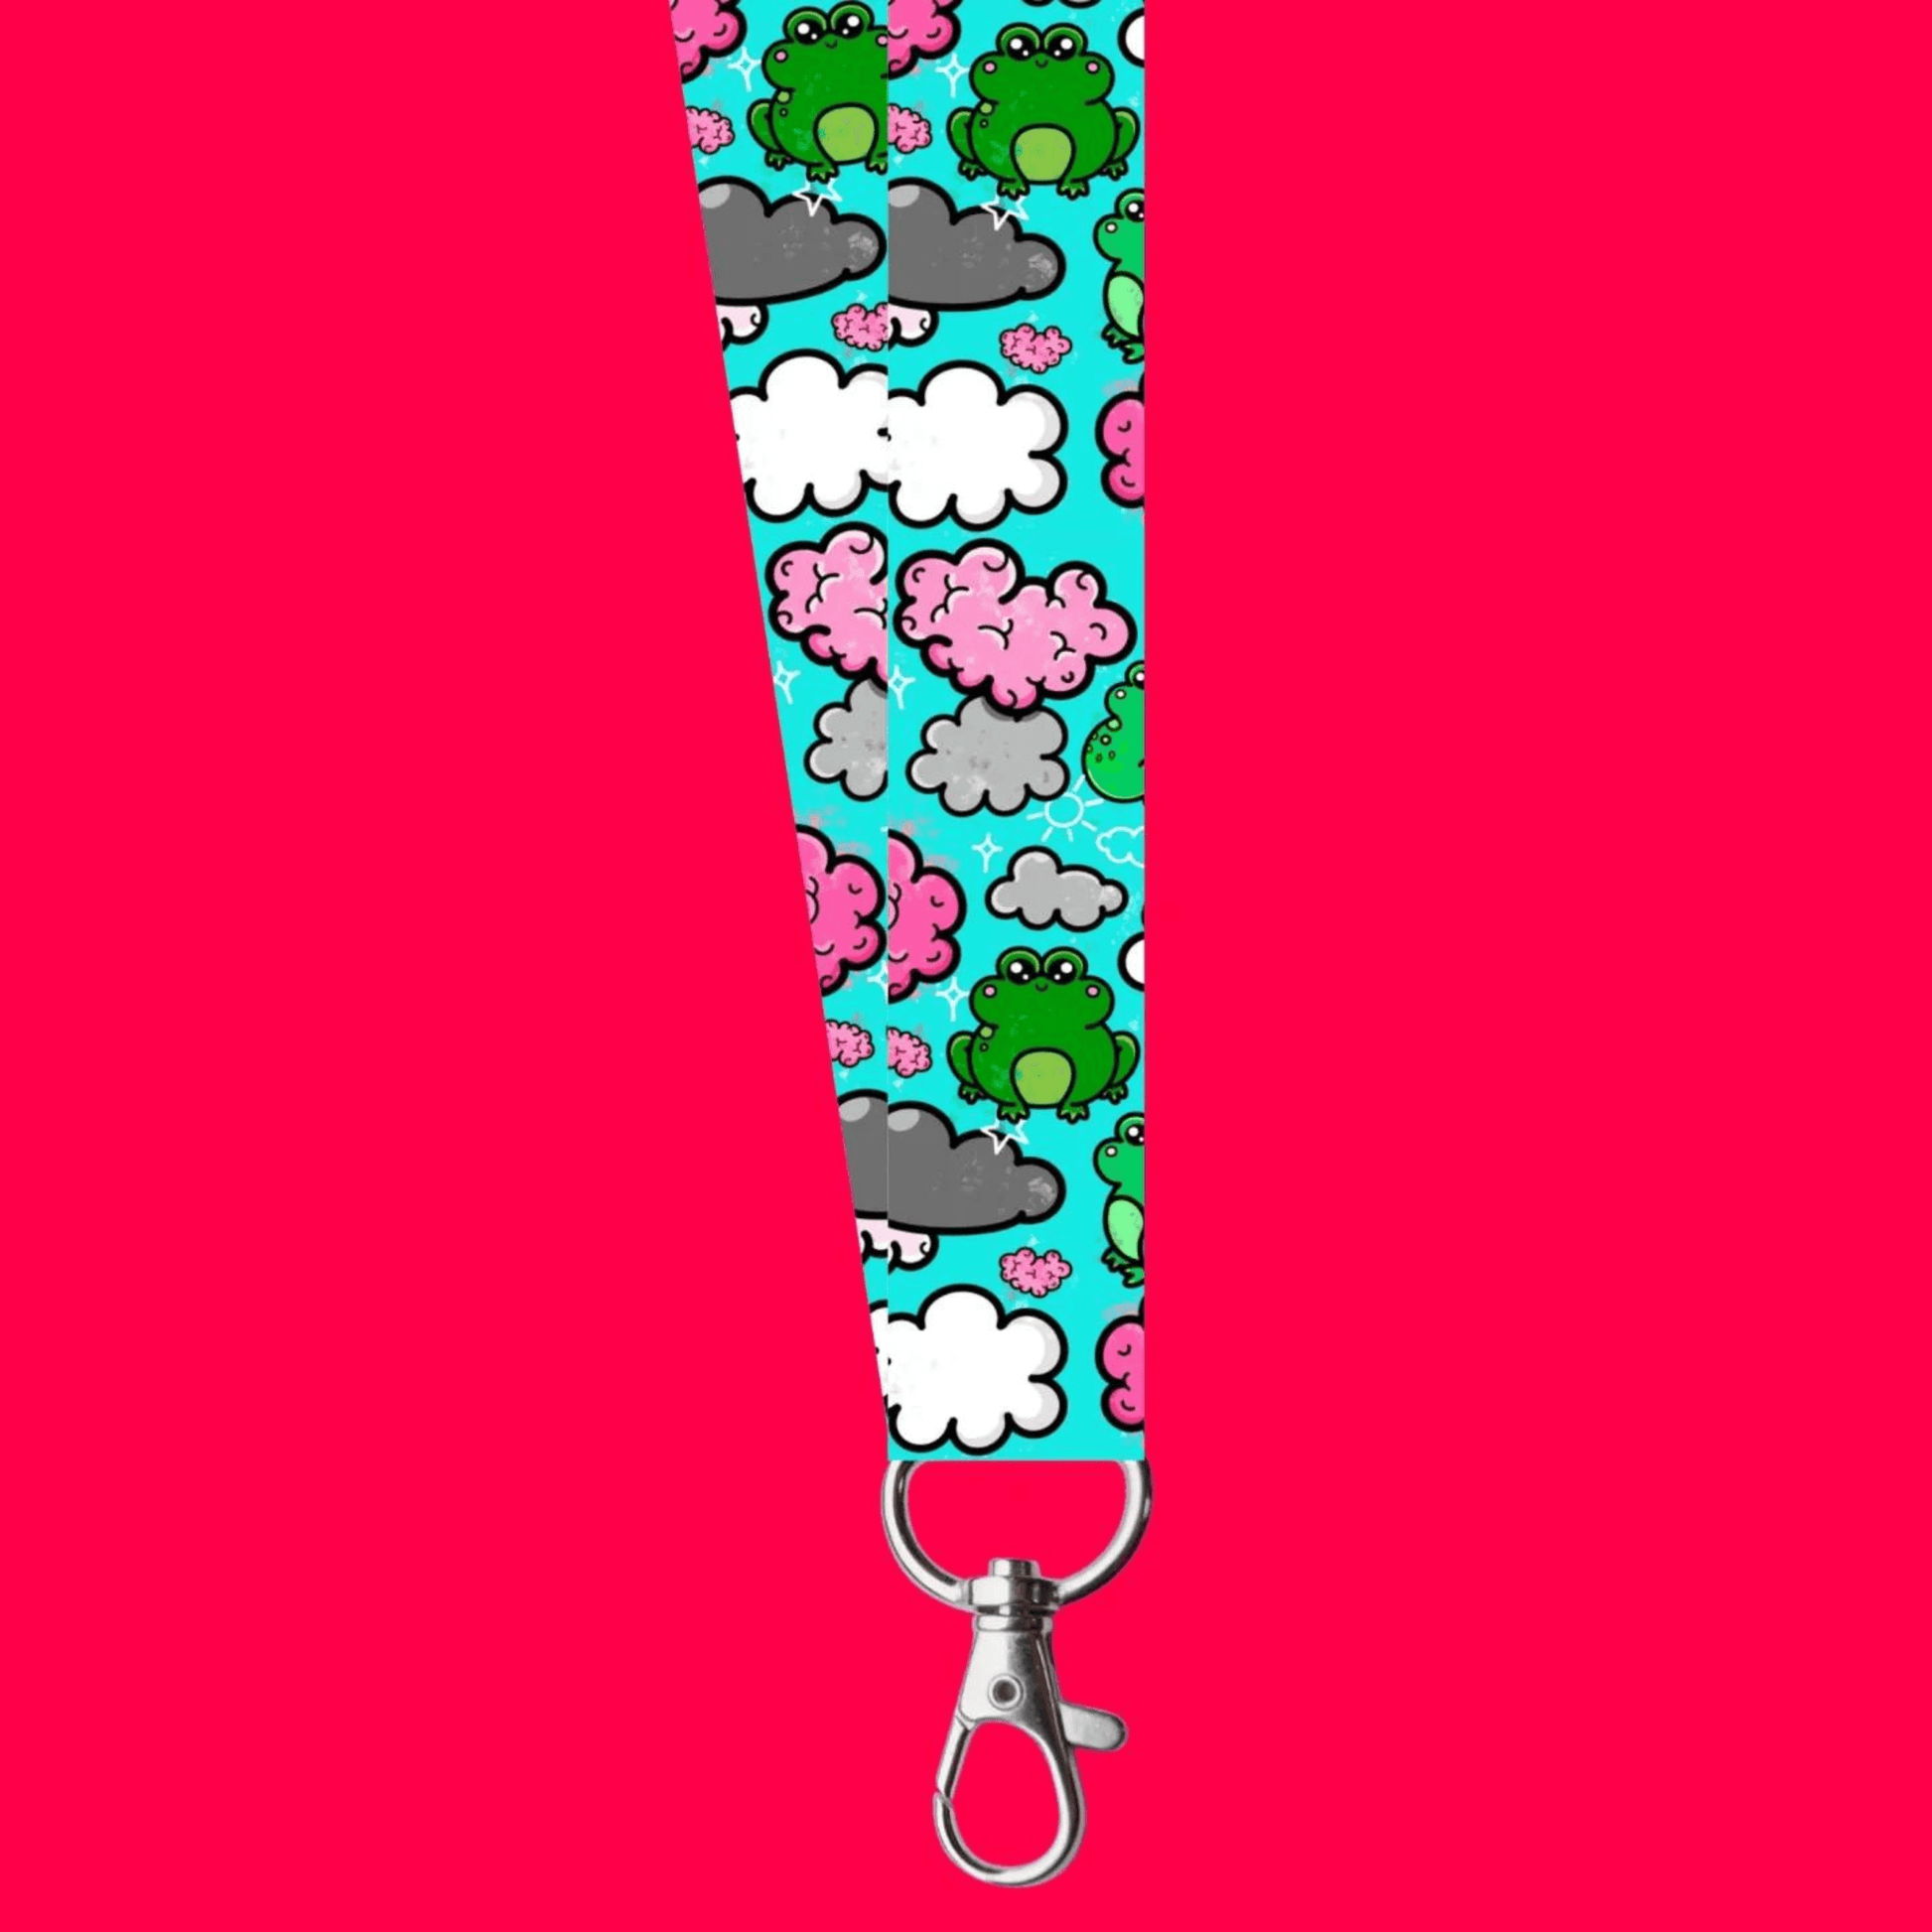 The Brain Frog Lanyard - Brain Fog on a red background. The lanyard has a silver lobster clip with a blue base covered in various kawaii face green frogs with pink cheeks, pink brain styled clouds with white and grey clouds and white sparkles all over. The design was created to raise awareness for brain fog.